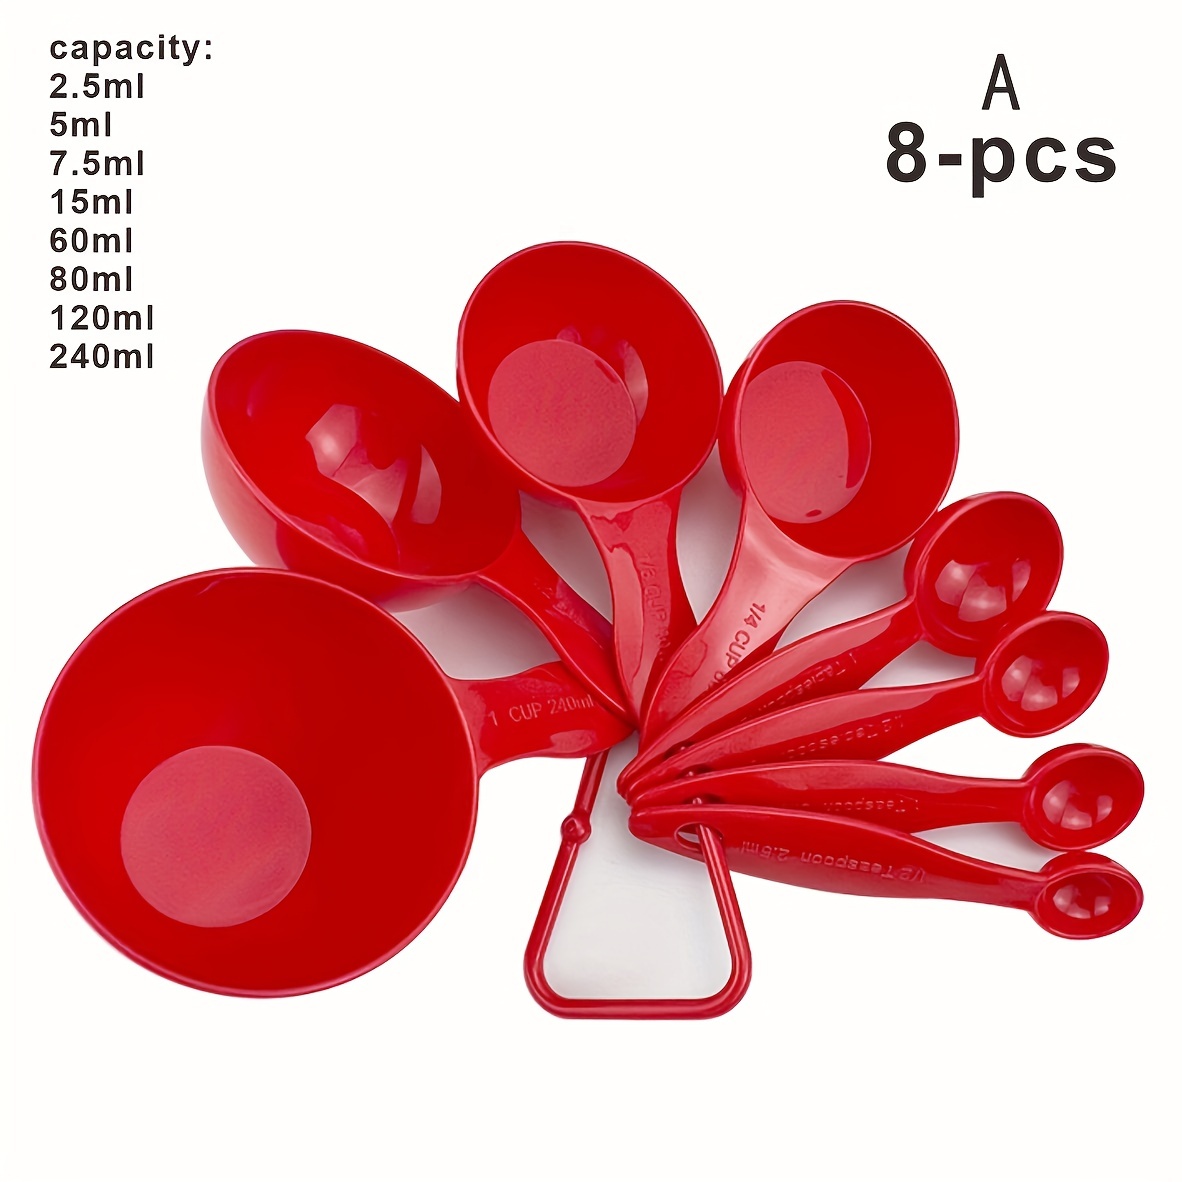 KitchenAid Measuring Cups and Spoons - Red, 9 pc - Foods Co.